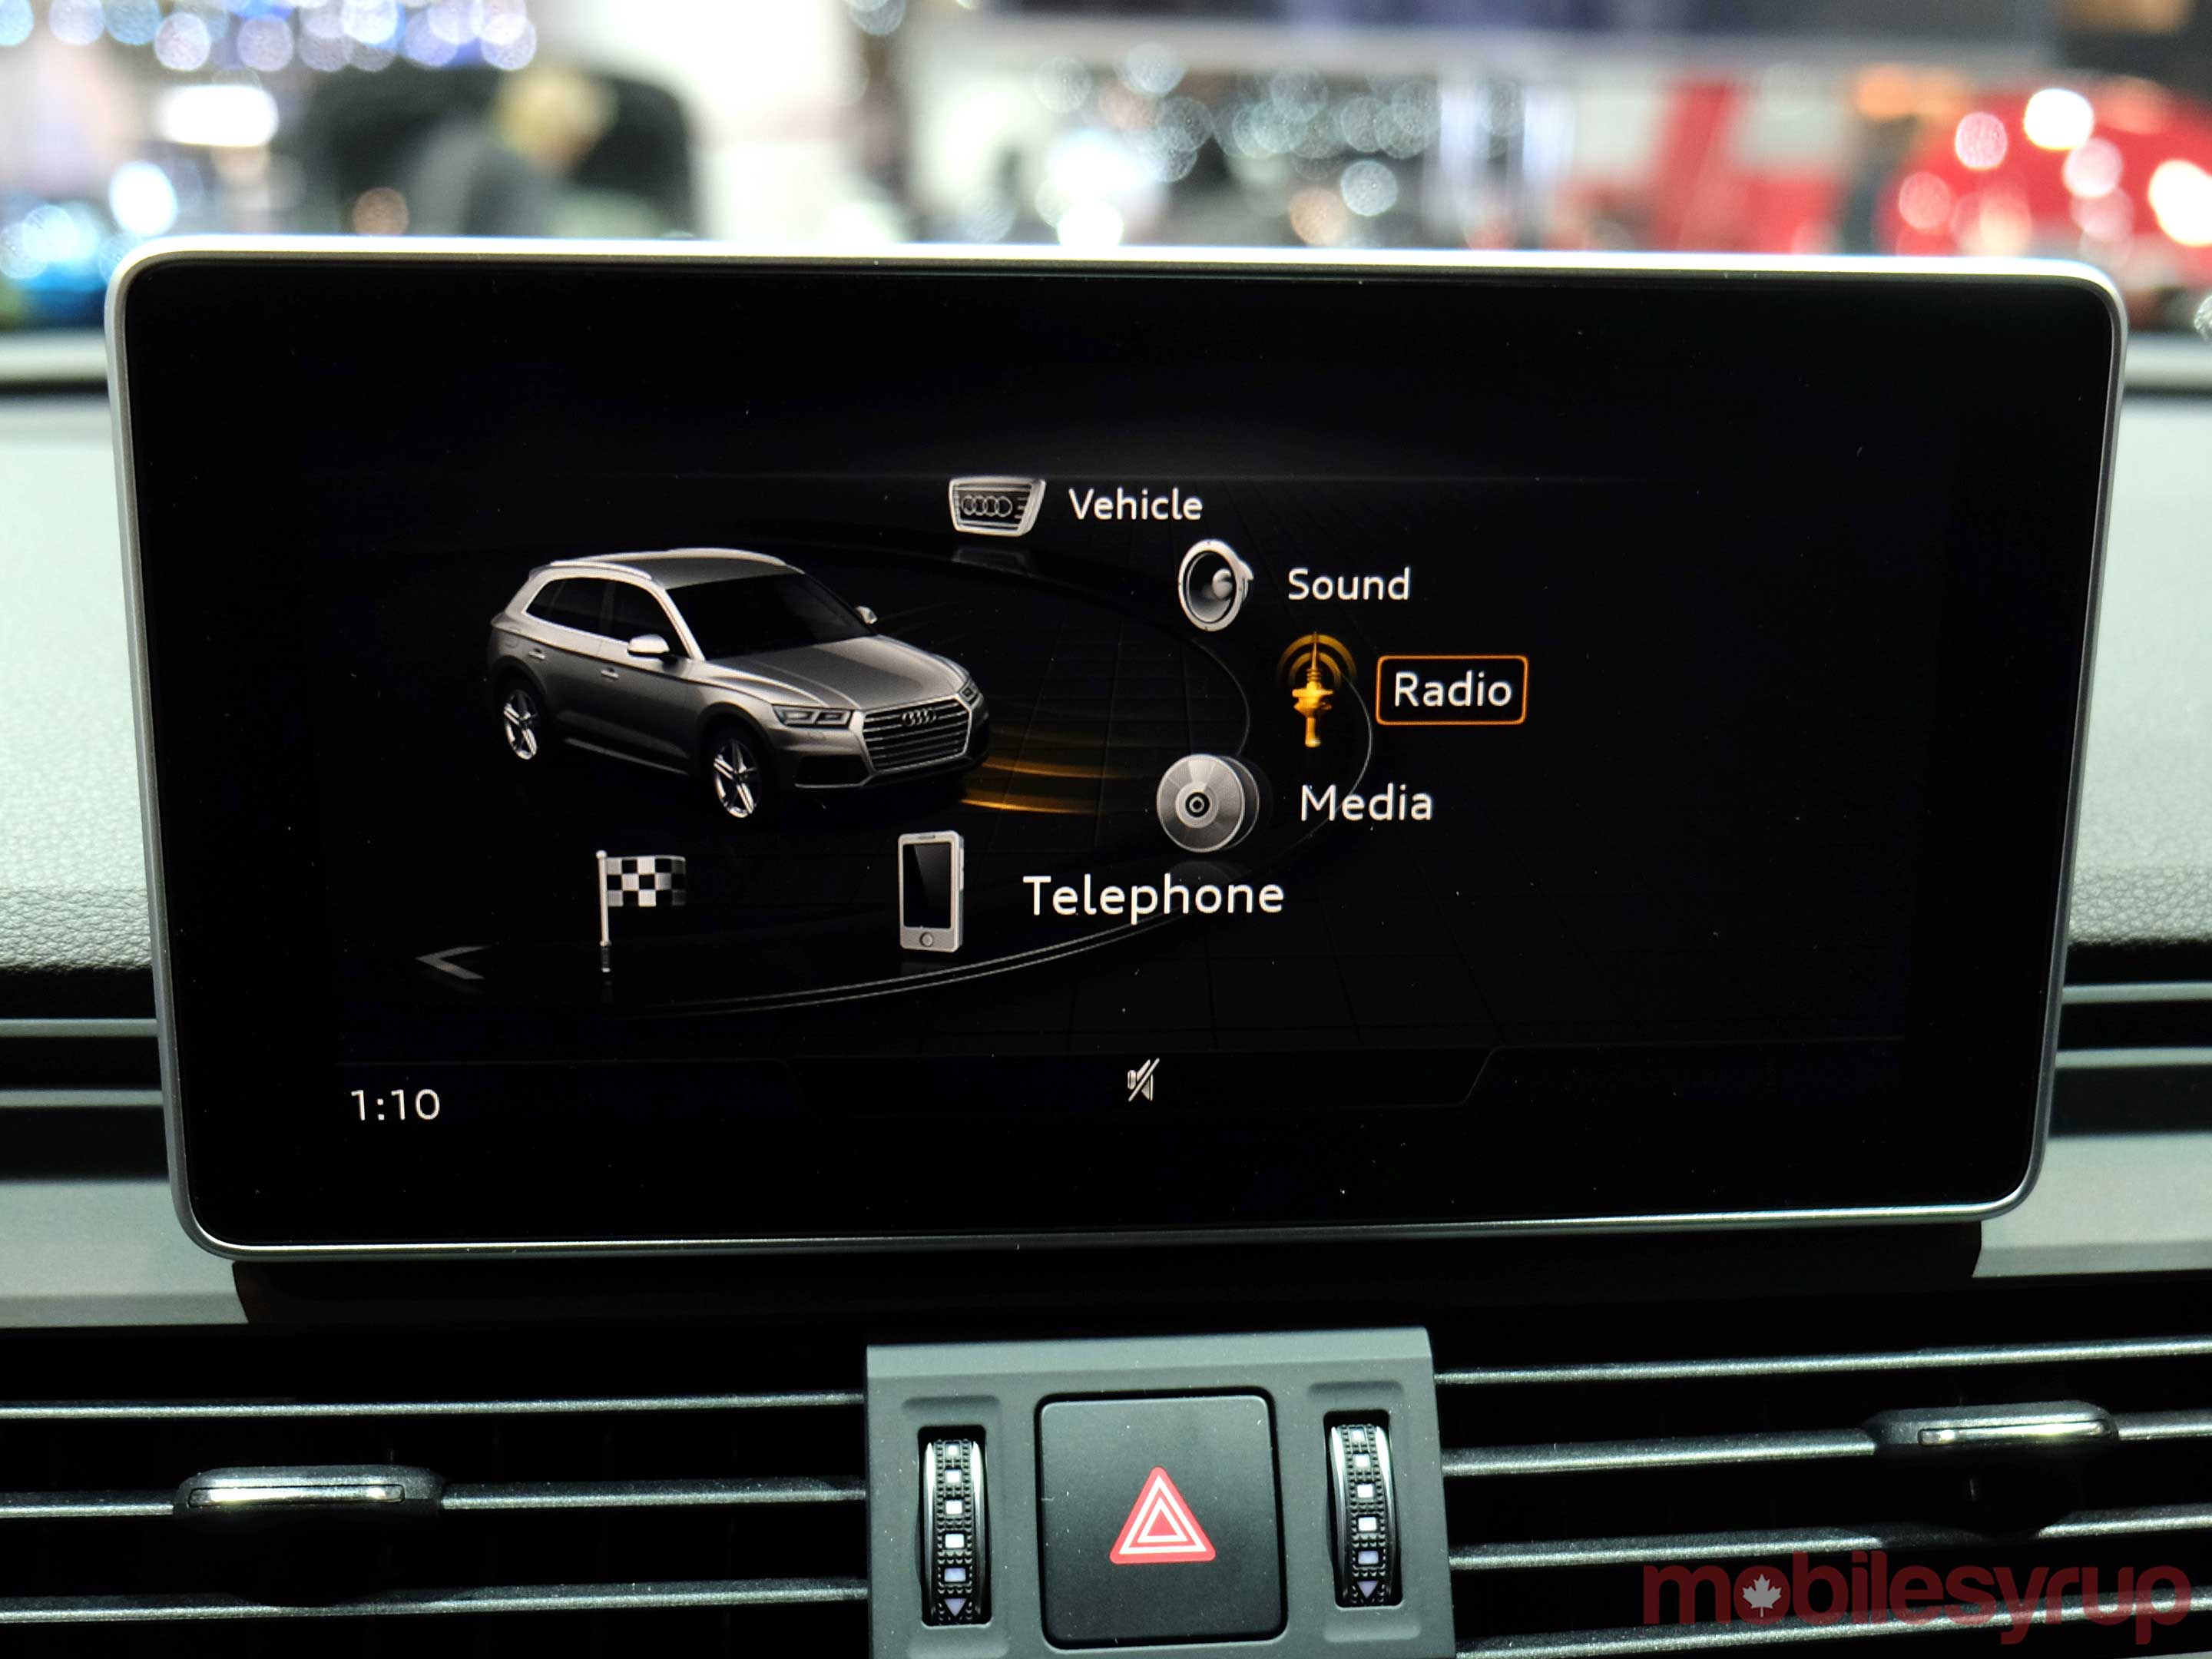 Audi infotainment screen at auto show